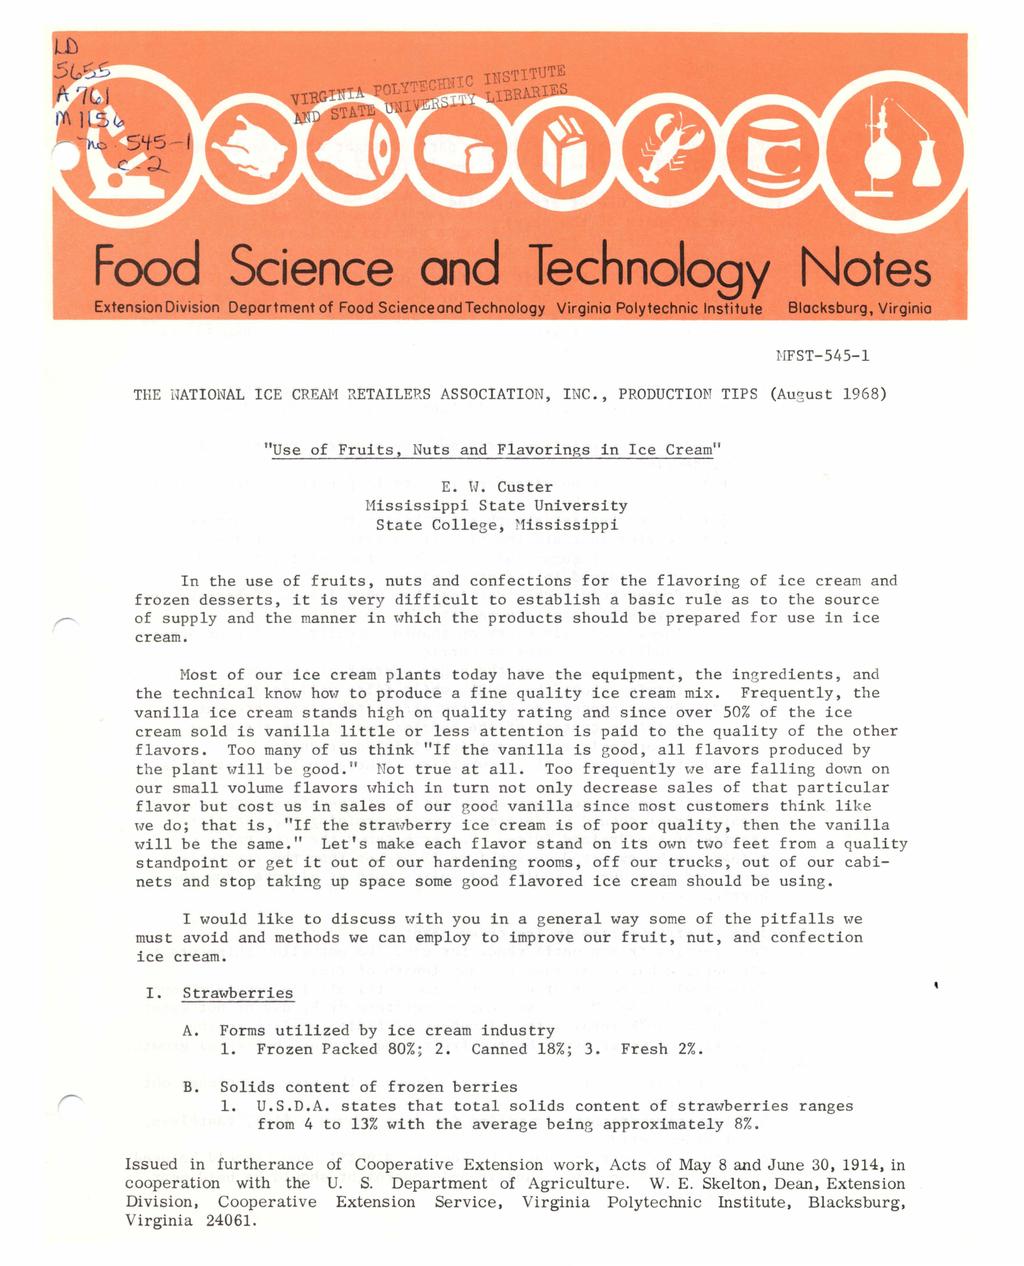 Food Science and Technology Notes Extension Division Deportment of Food Science and Technology Virginia Polytechnic Institute Blacksburg, Virginia MFST-545-1 THE HATIONAL ICE CREAM RETAILERS